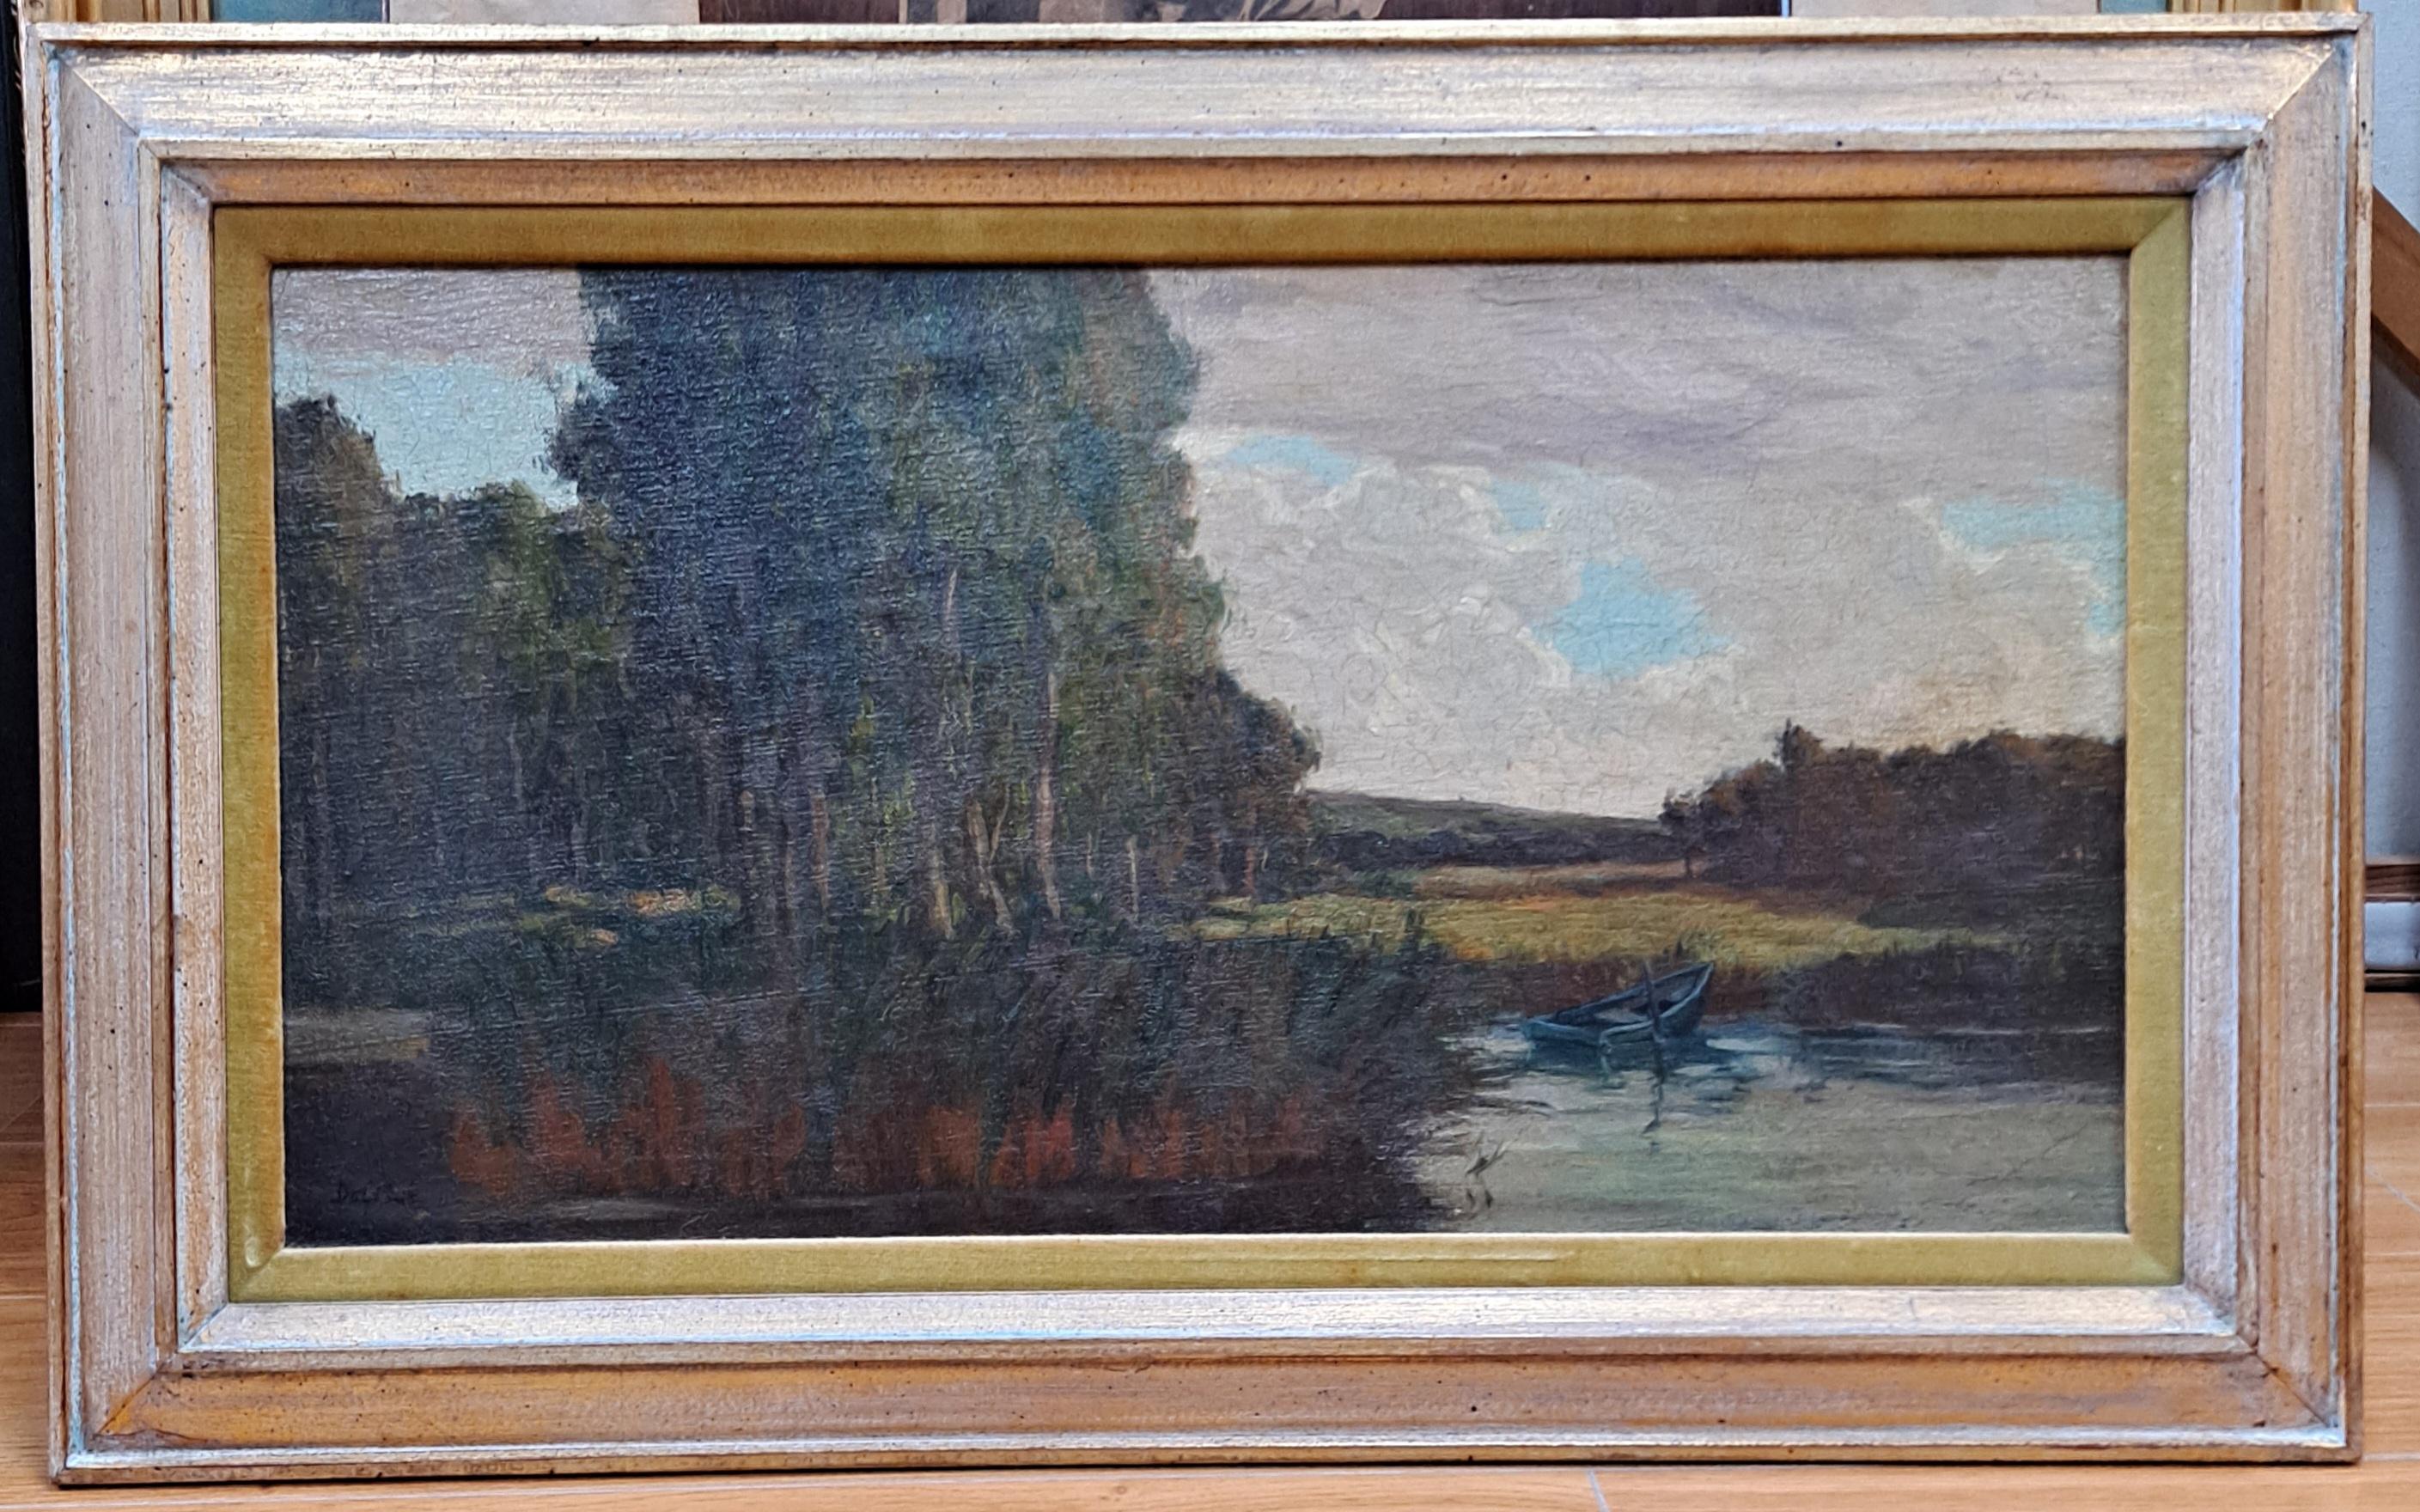 Maurice Auguste Del Mue (1875-1955) Beautiful River Landscape Painting 

Oil on Canvas 
Painting 12" x 22" 
Frame 16.75" x 27"

Painter, illustrator, muralist, and graphic designer Maurice Del Mué was born in Paris, France, in 1875 to Swiss parents.